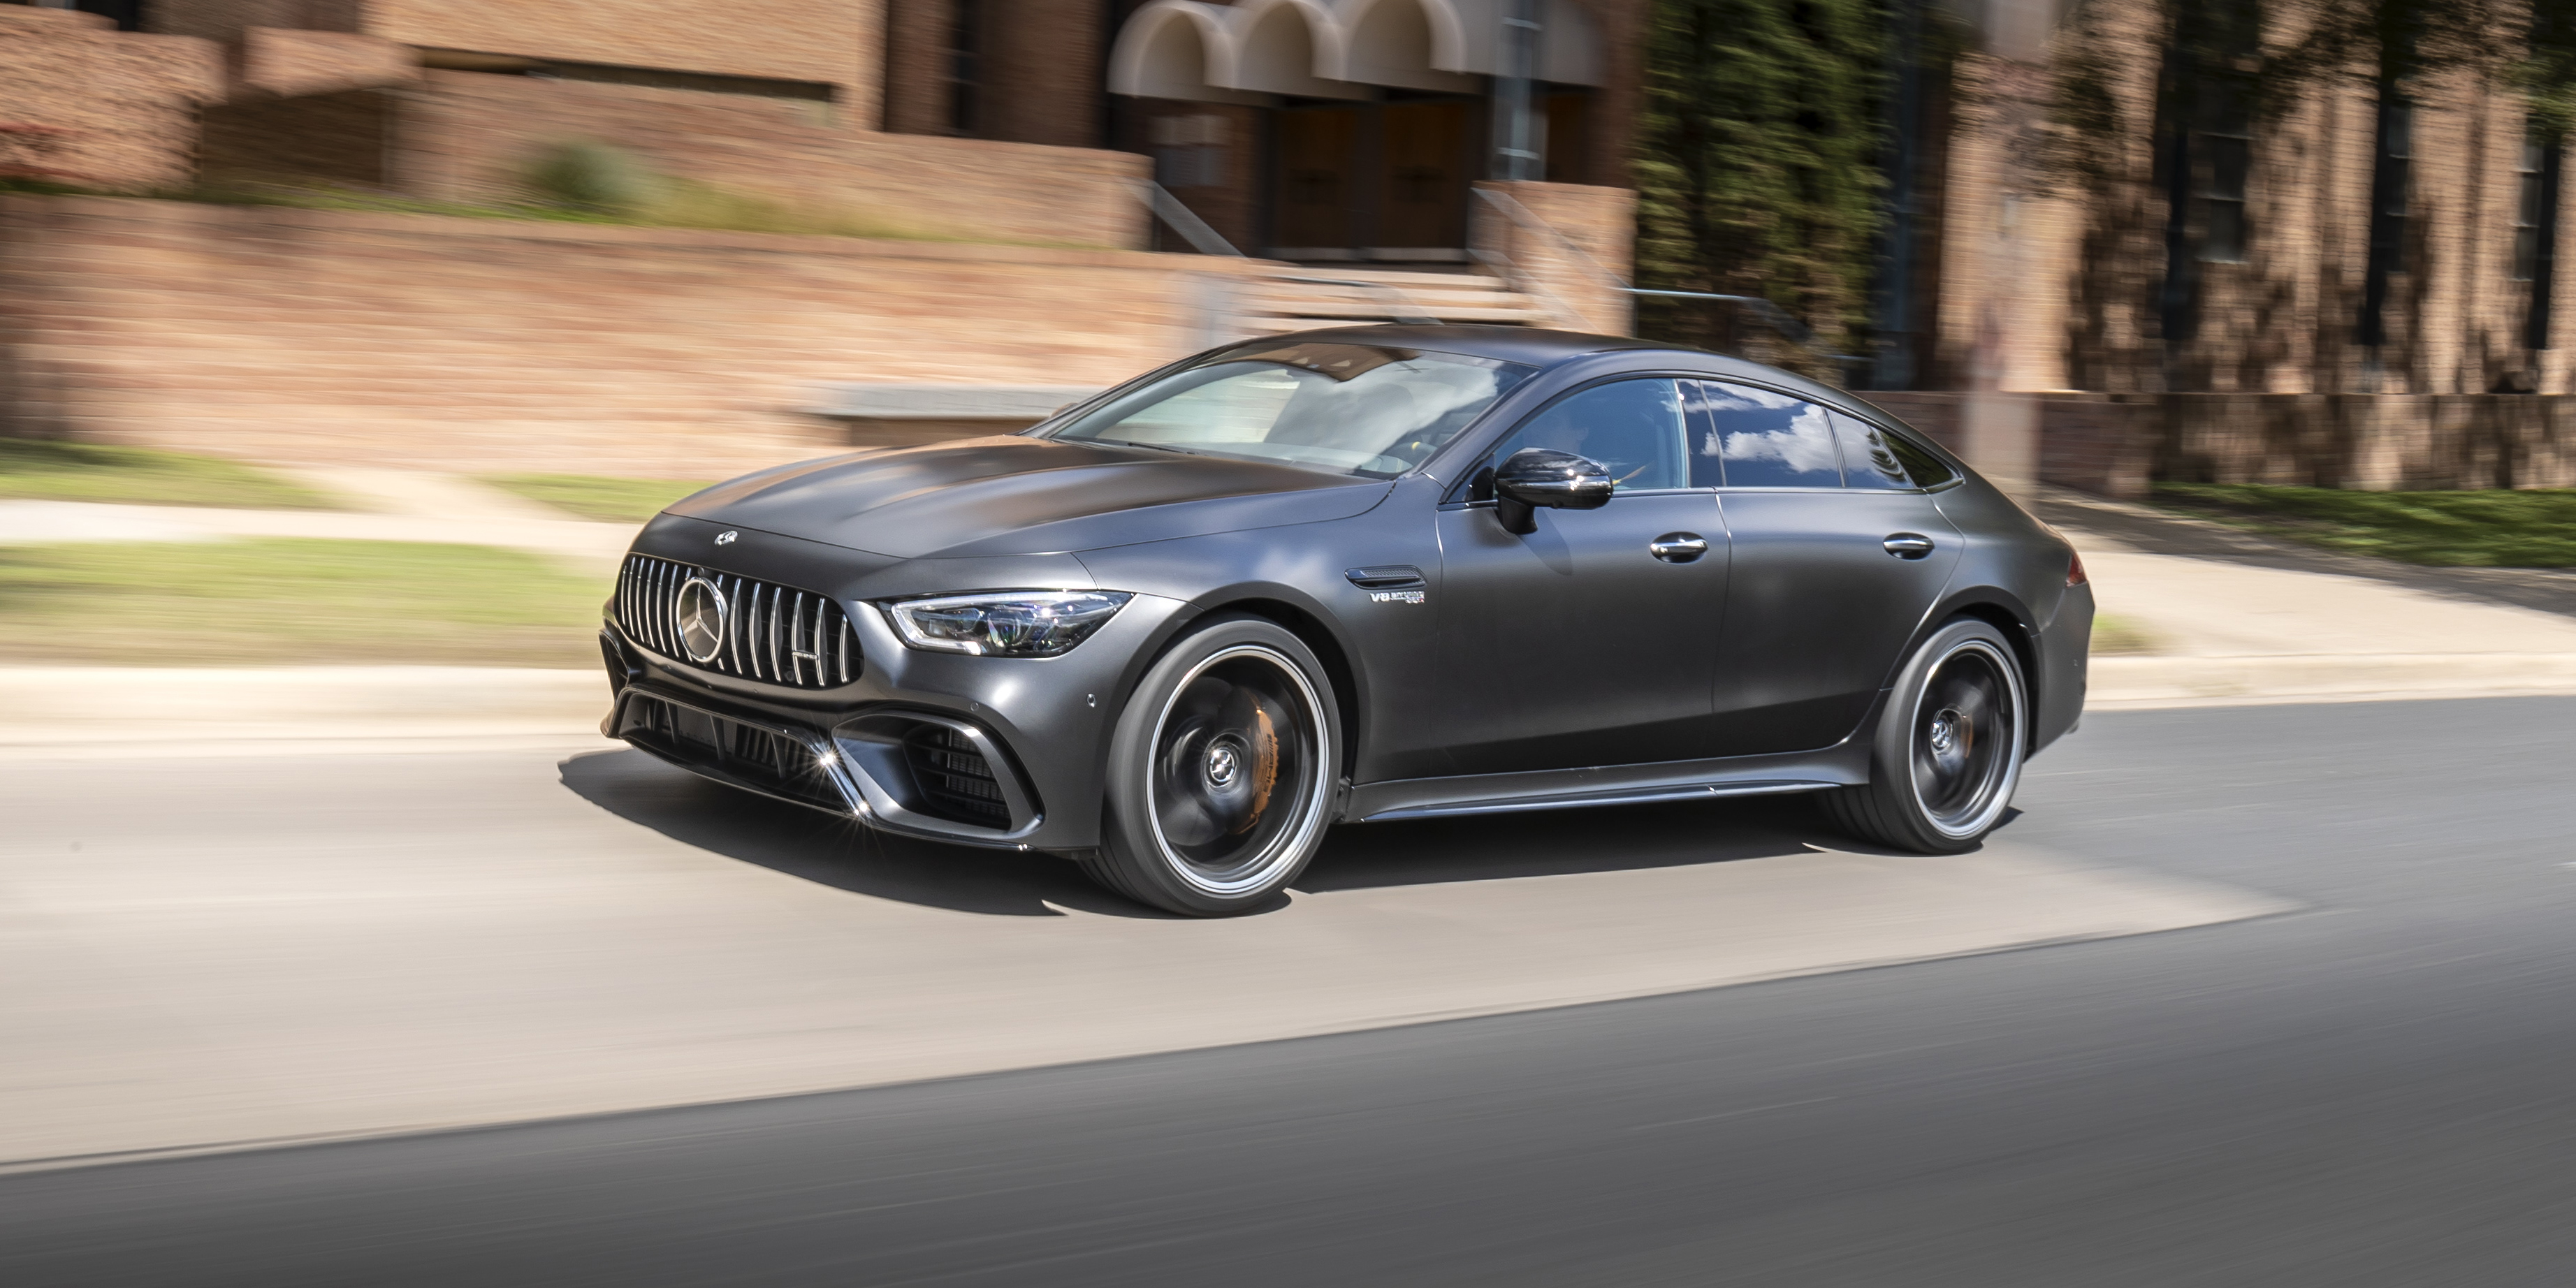 Mercedes Amg Gt 4 Door Review 21 Carwow